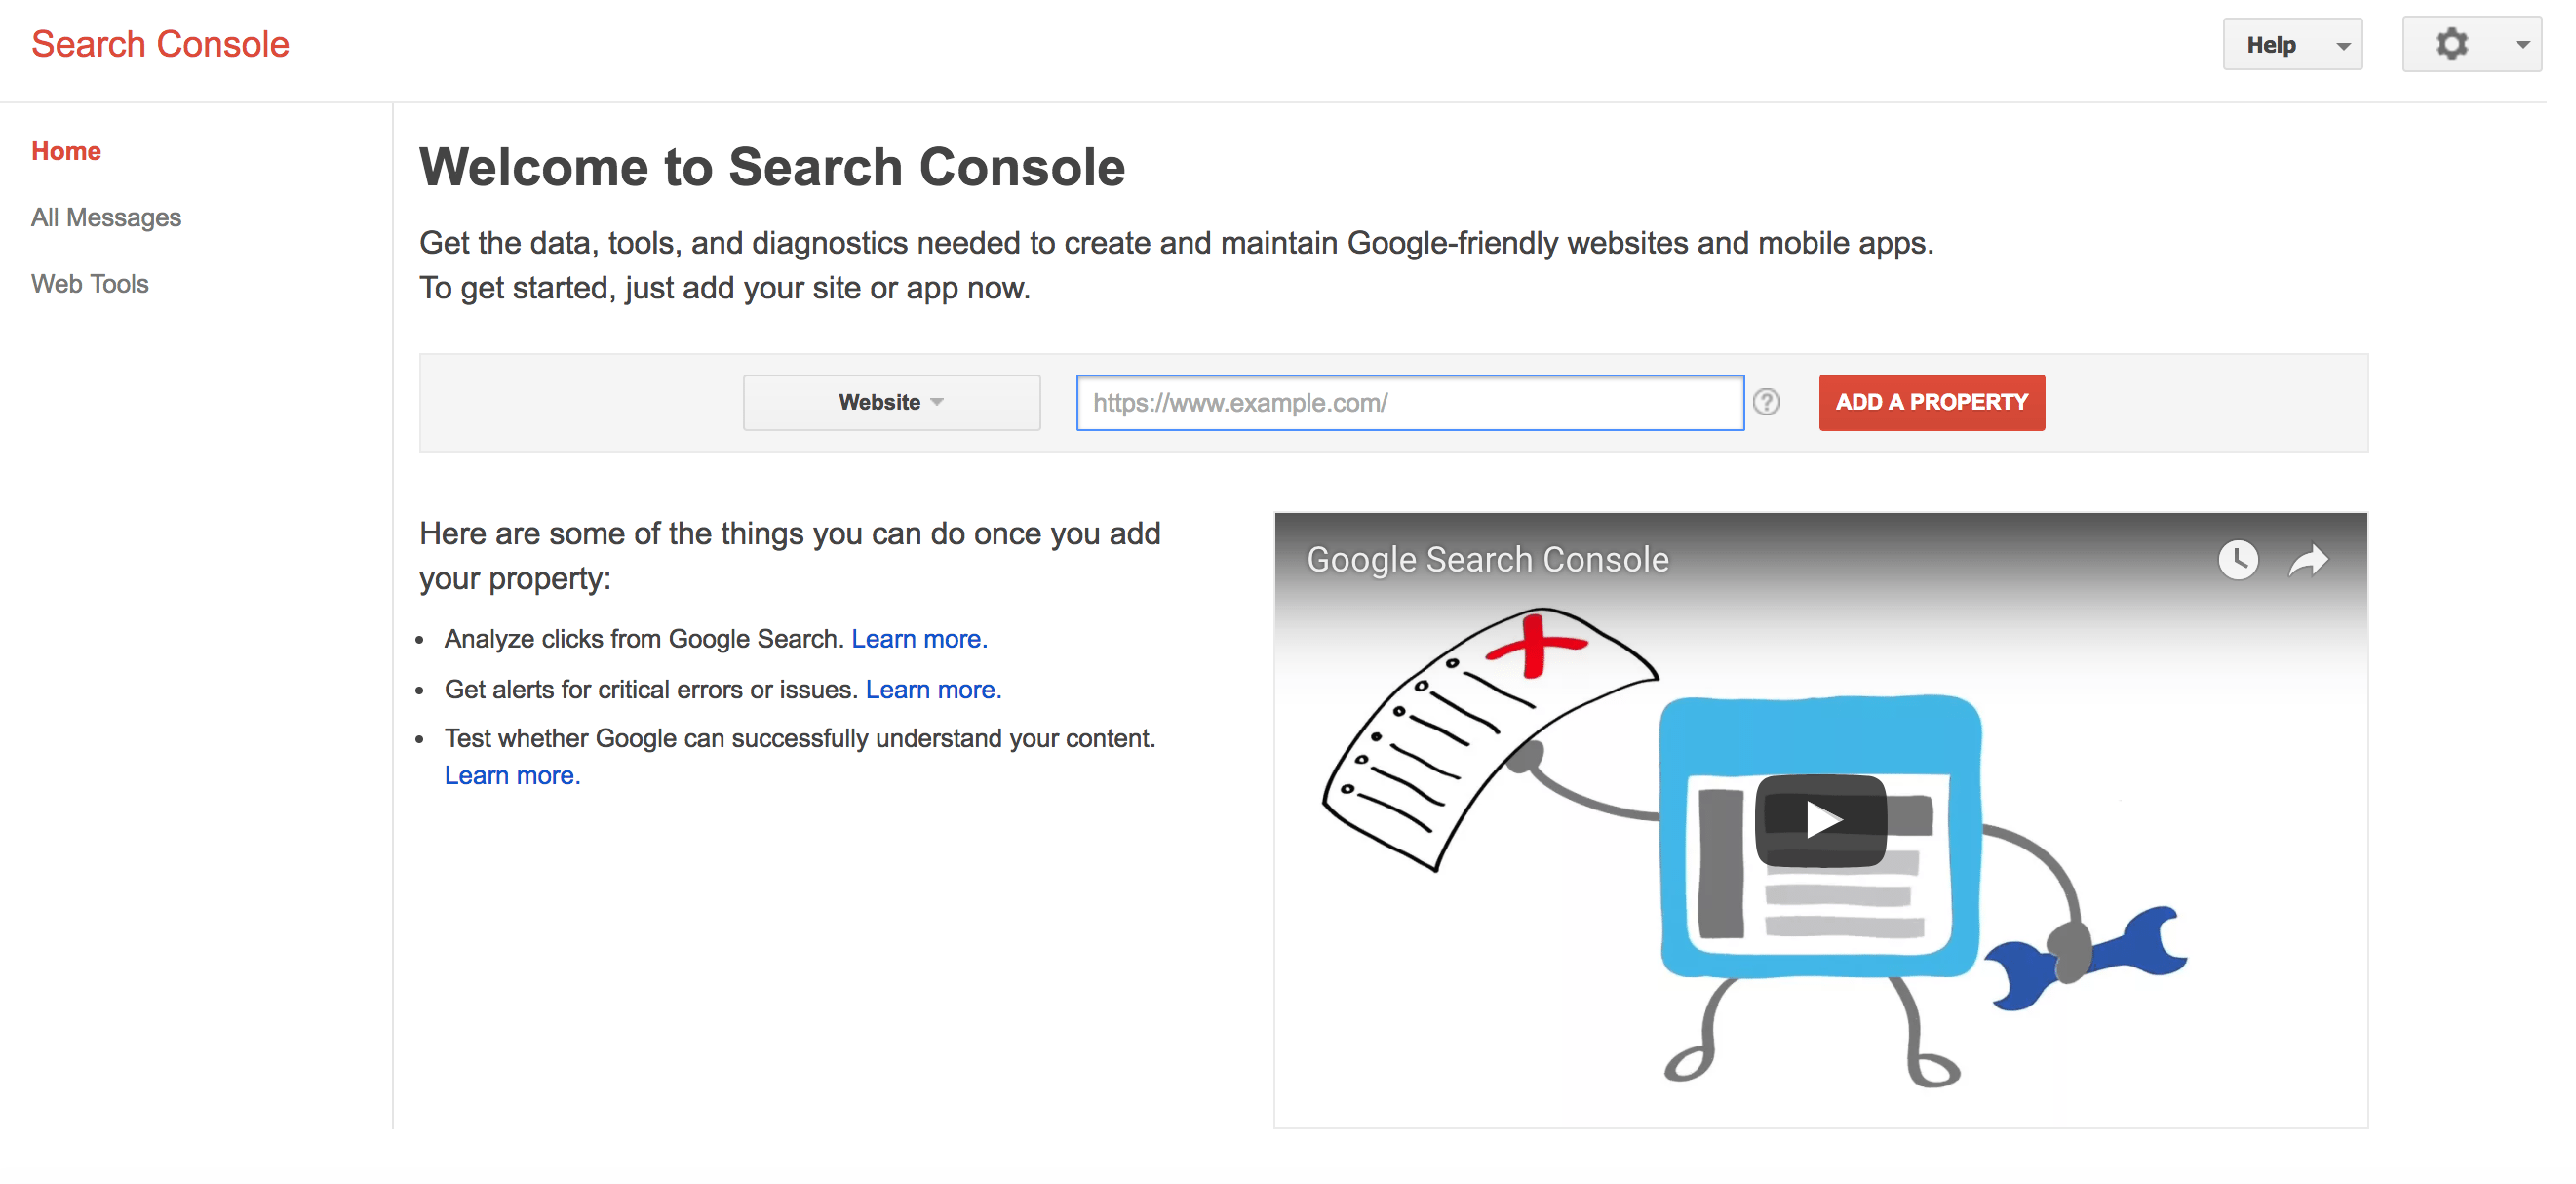 Search Console For Sitemap Submission